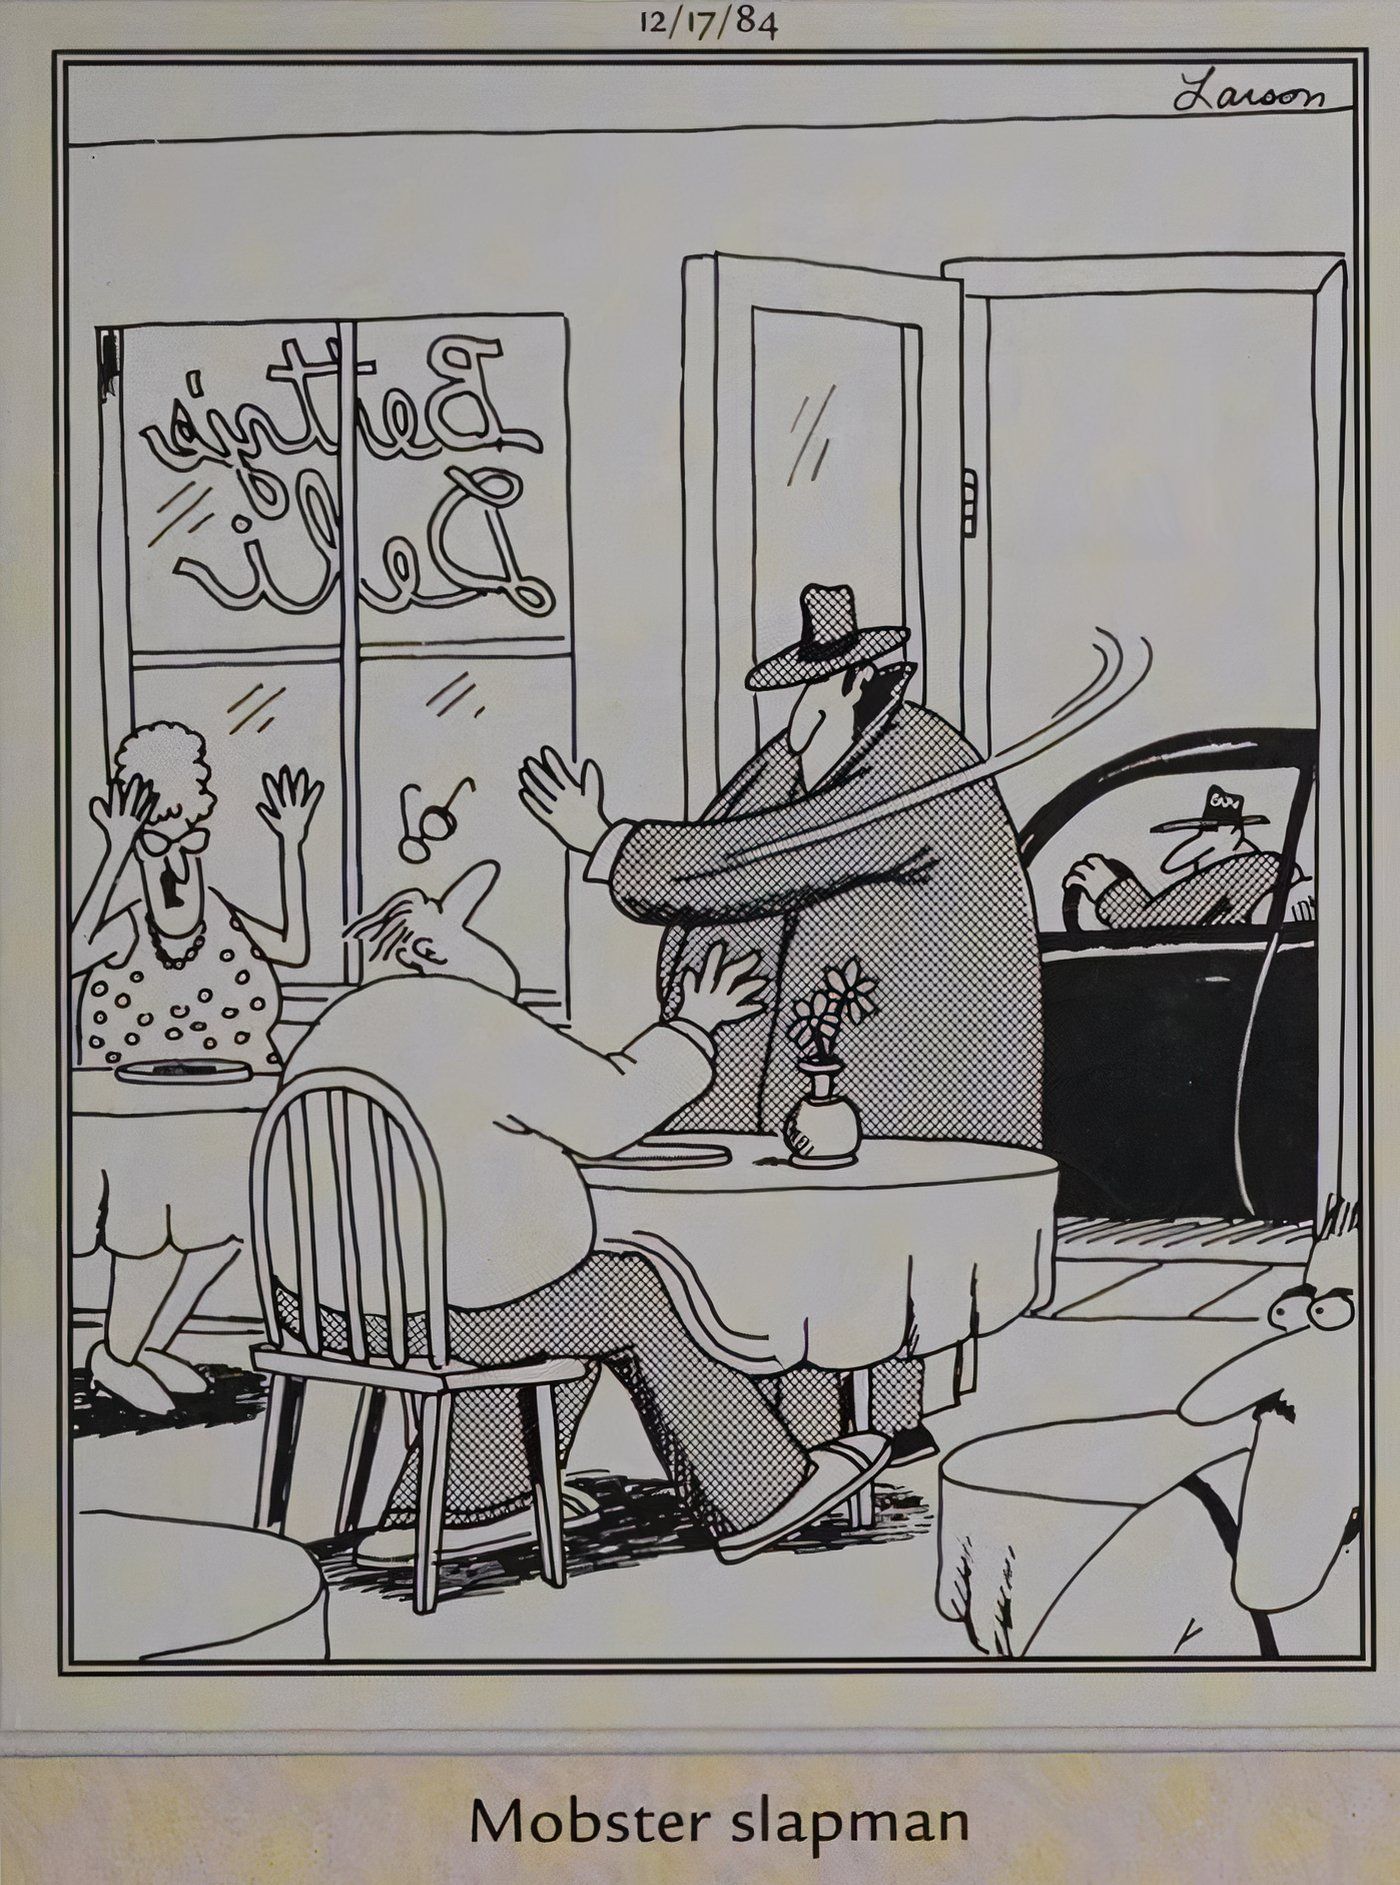 Far Side comic featuring a 'mobster slapman', in a play on the idea of a Mafia hit.